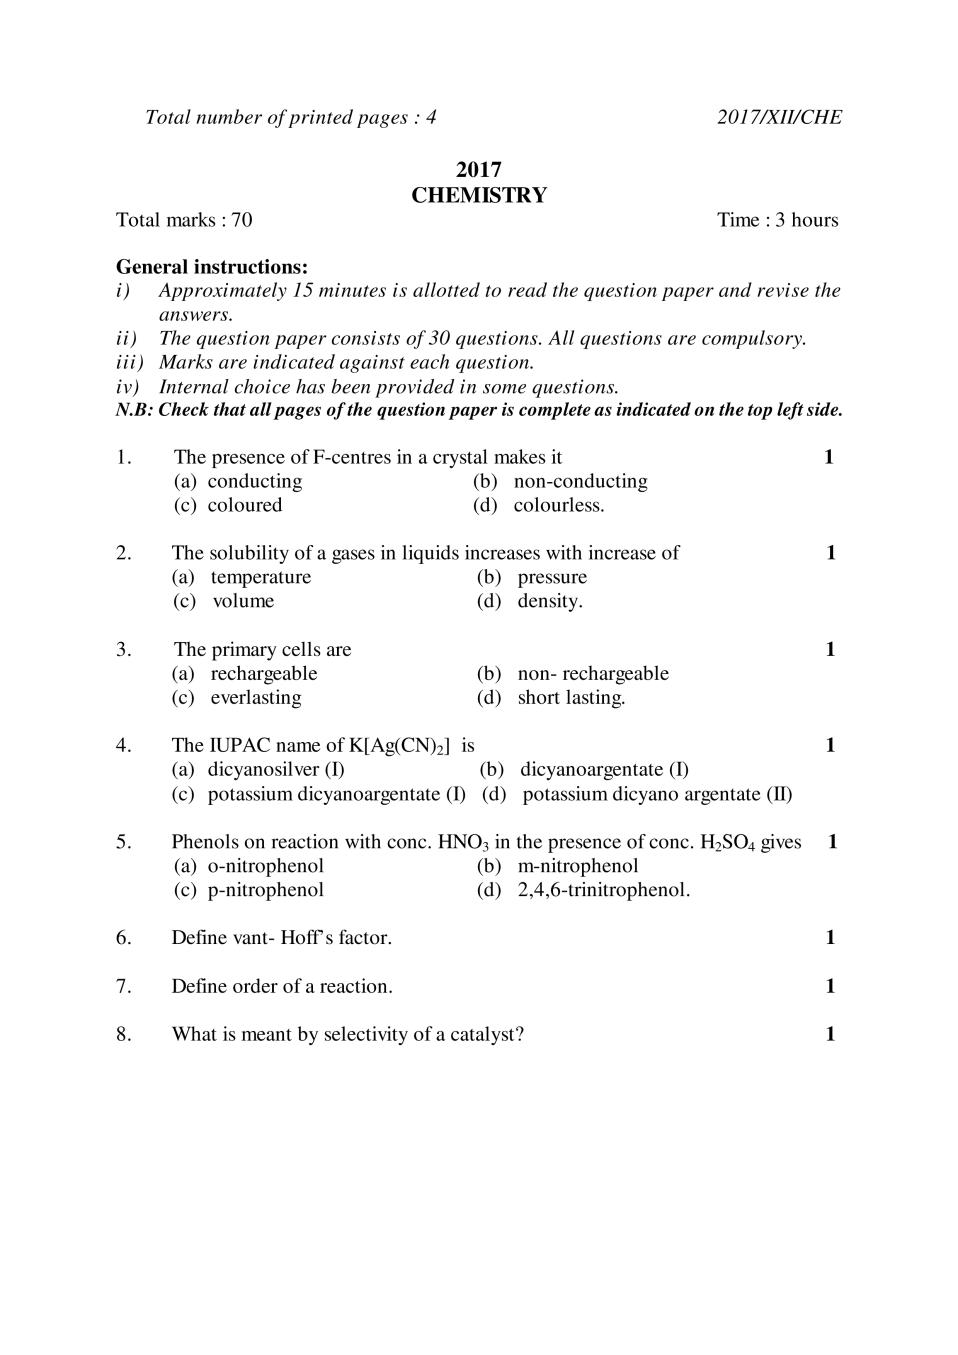 NBSE Class 12 Question Paper 2017 for Chemistry - Page 1